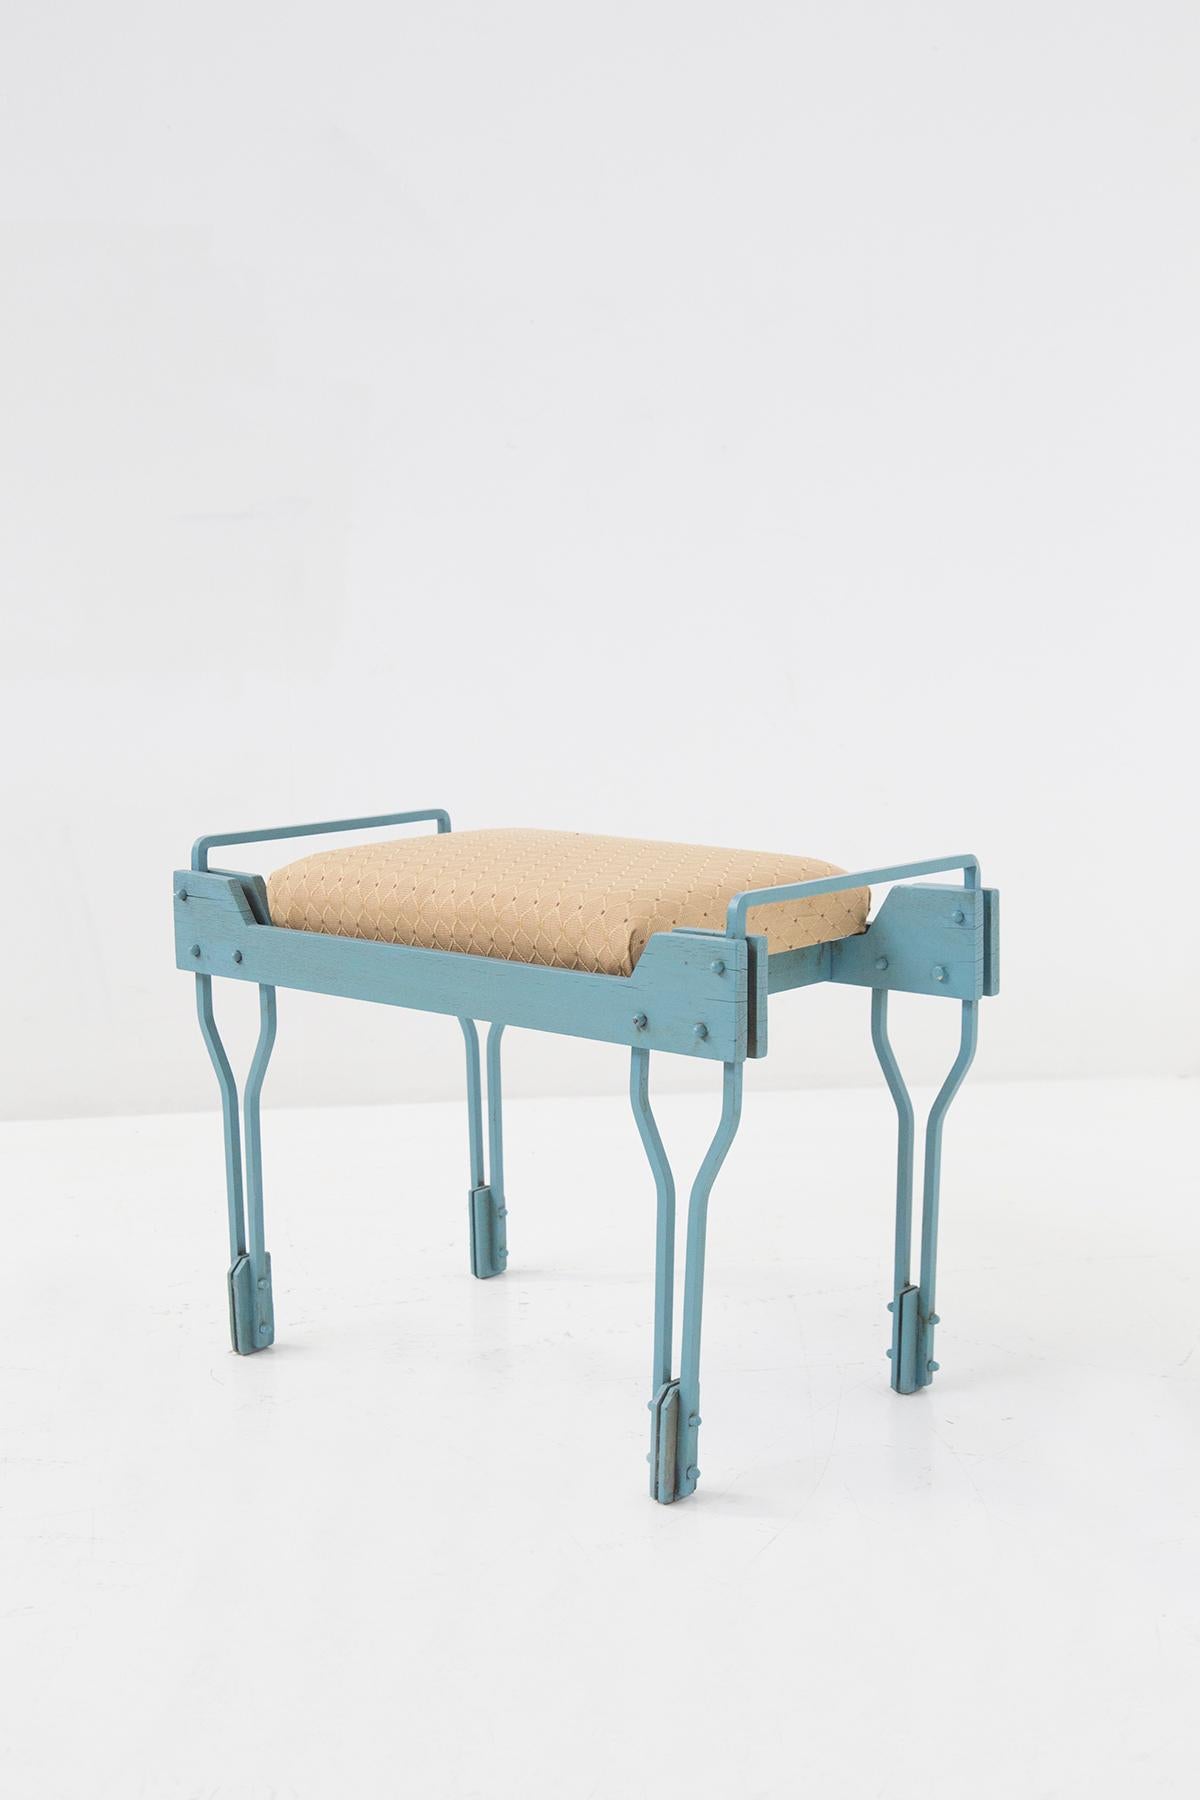 Small Italian bench in blue-painted wood designed in the 1950s of fine Italian manufacture.
The bench has four legs at the base to support the seat, made of wood joined two by two in a splendid interplay of geometric shapes.
The structure is